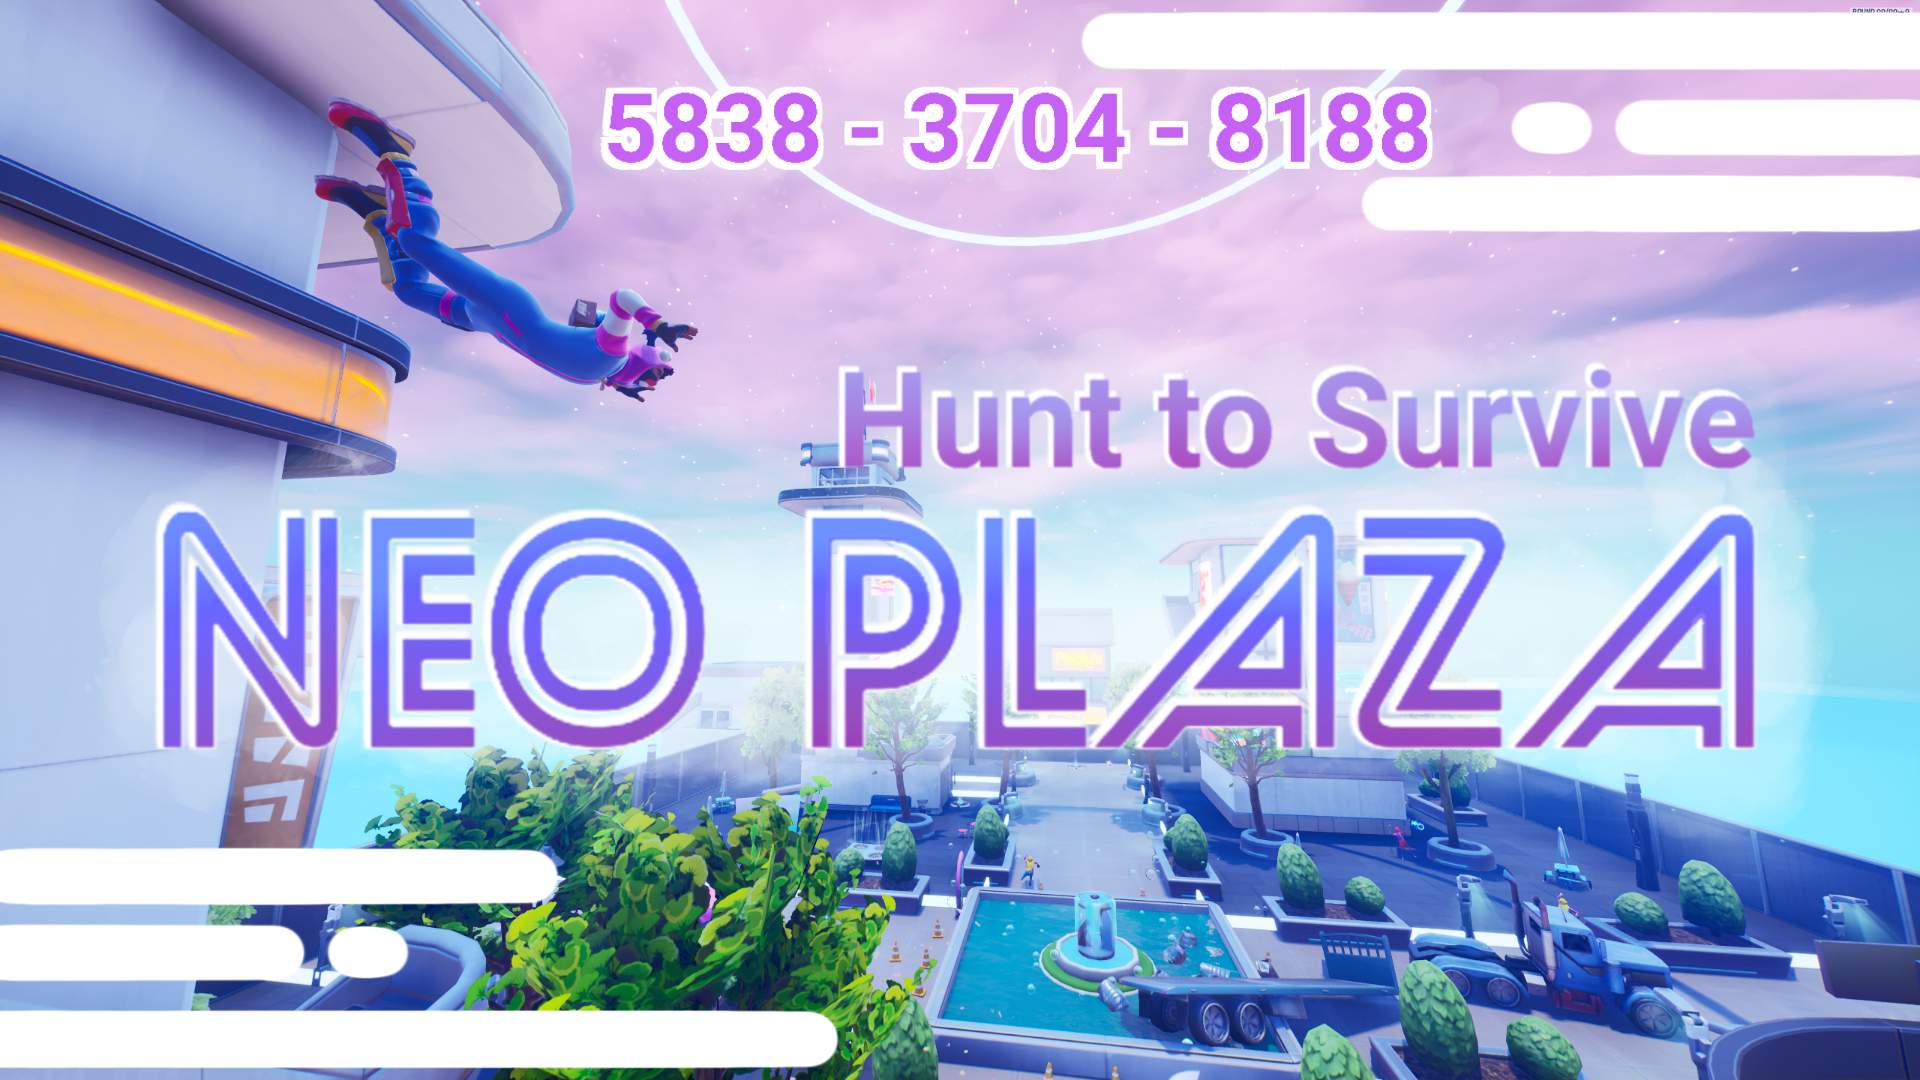 NEO PLAZA - HUNT TO SURVIVE